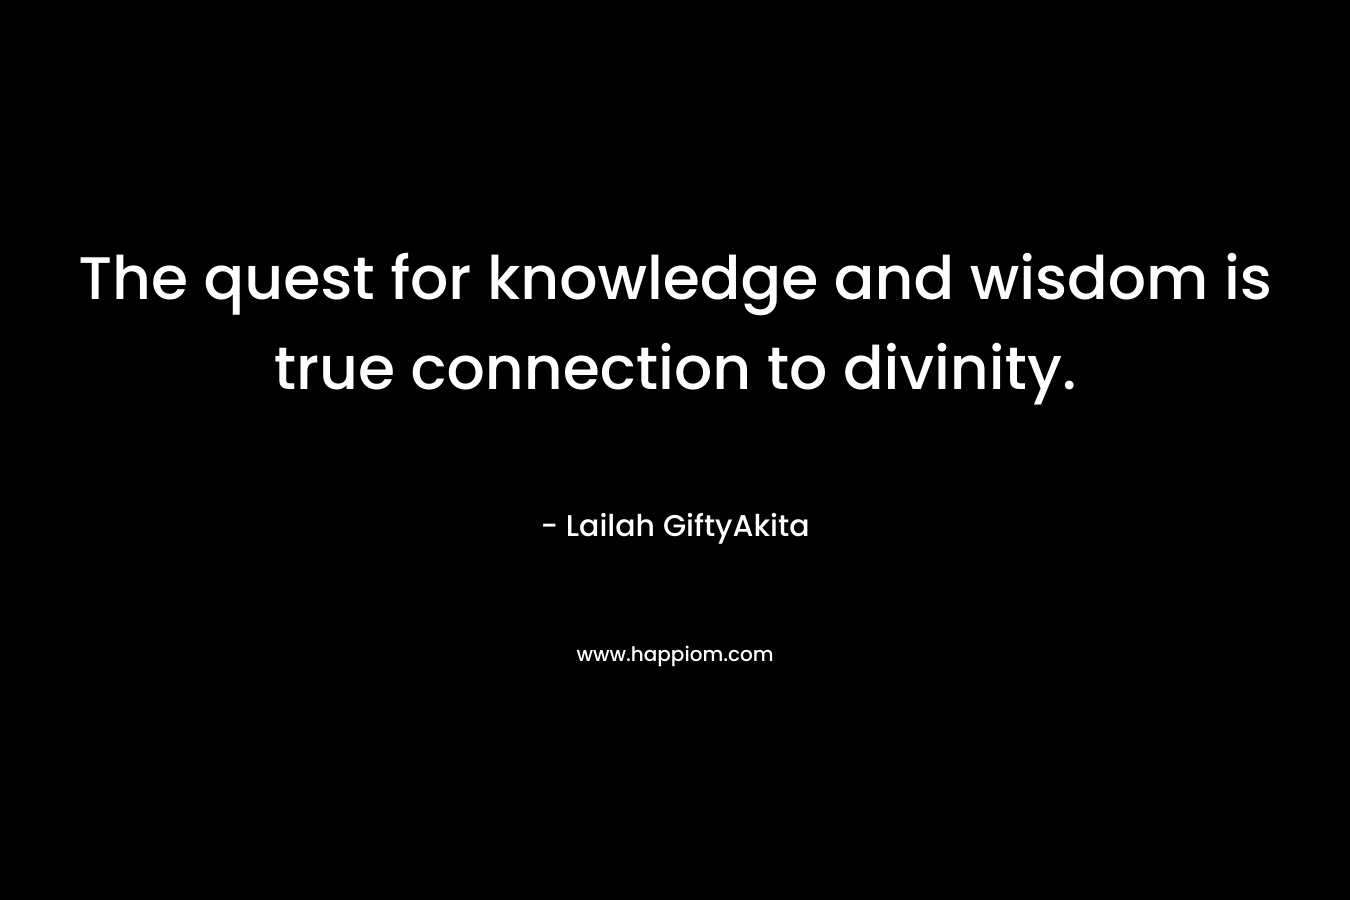 The quest for knowledge and wisdom is true connection to divinity.